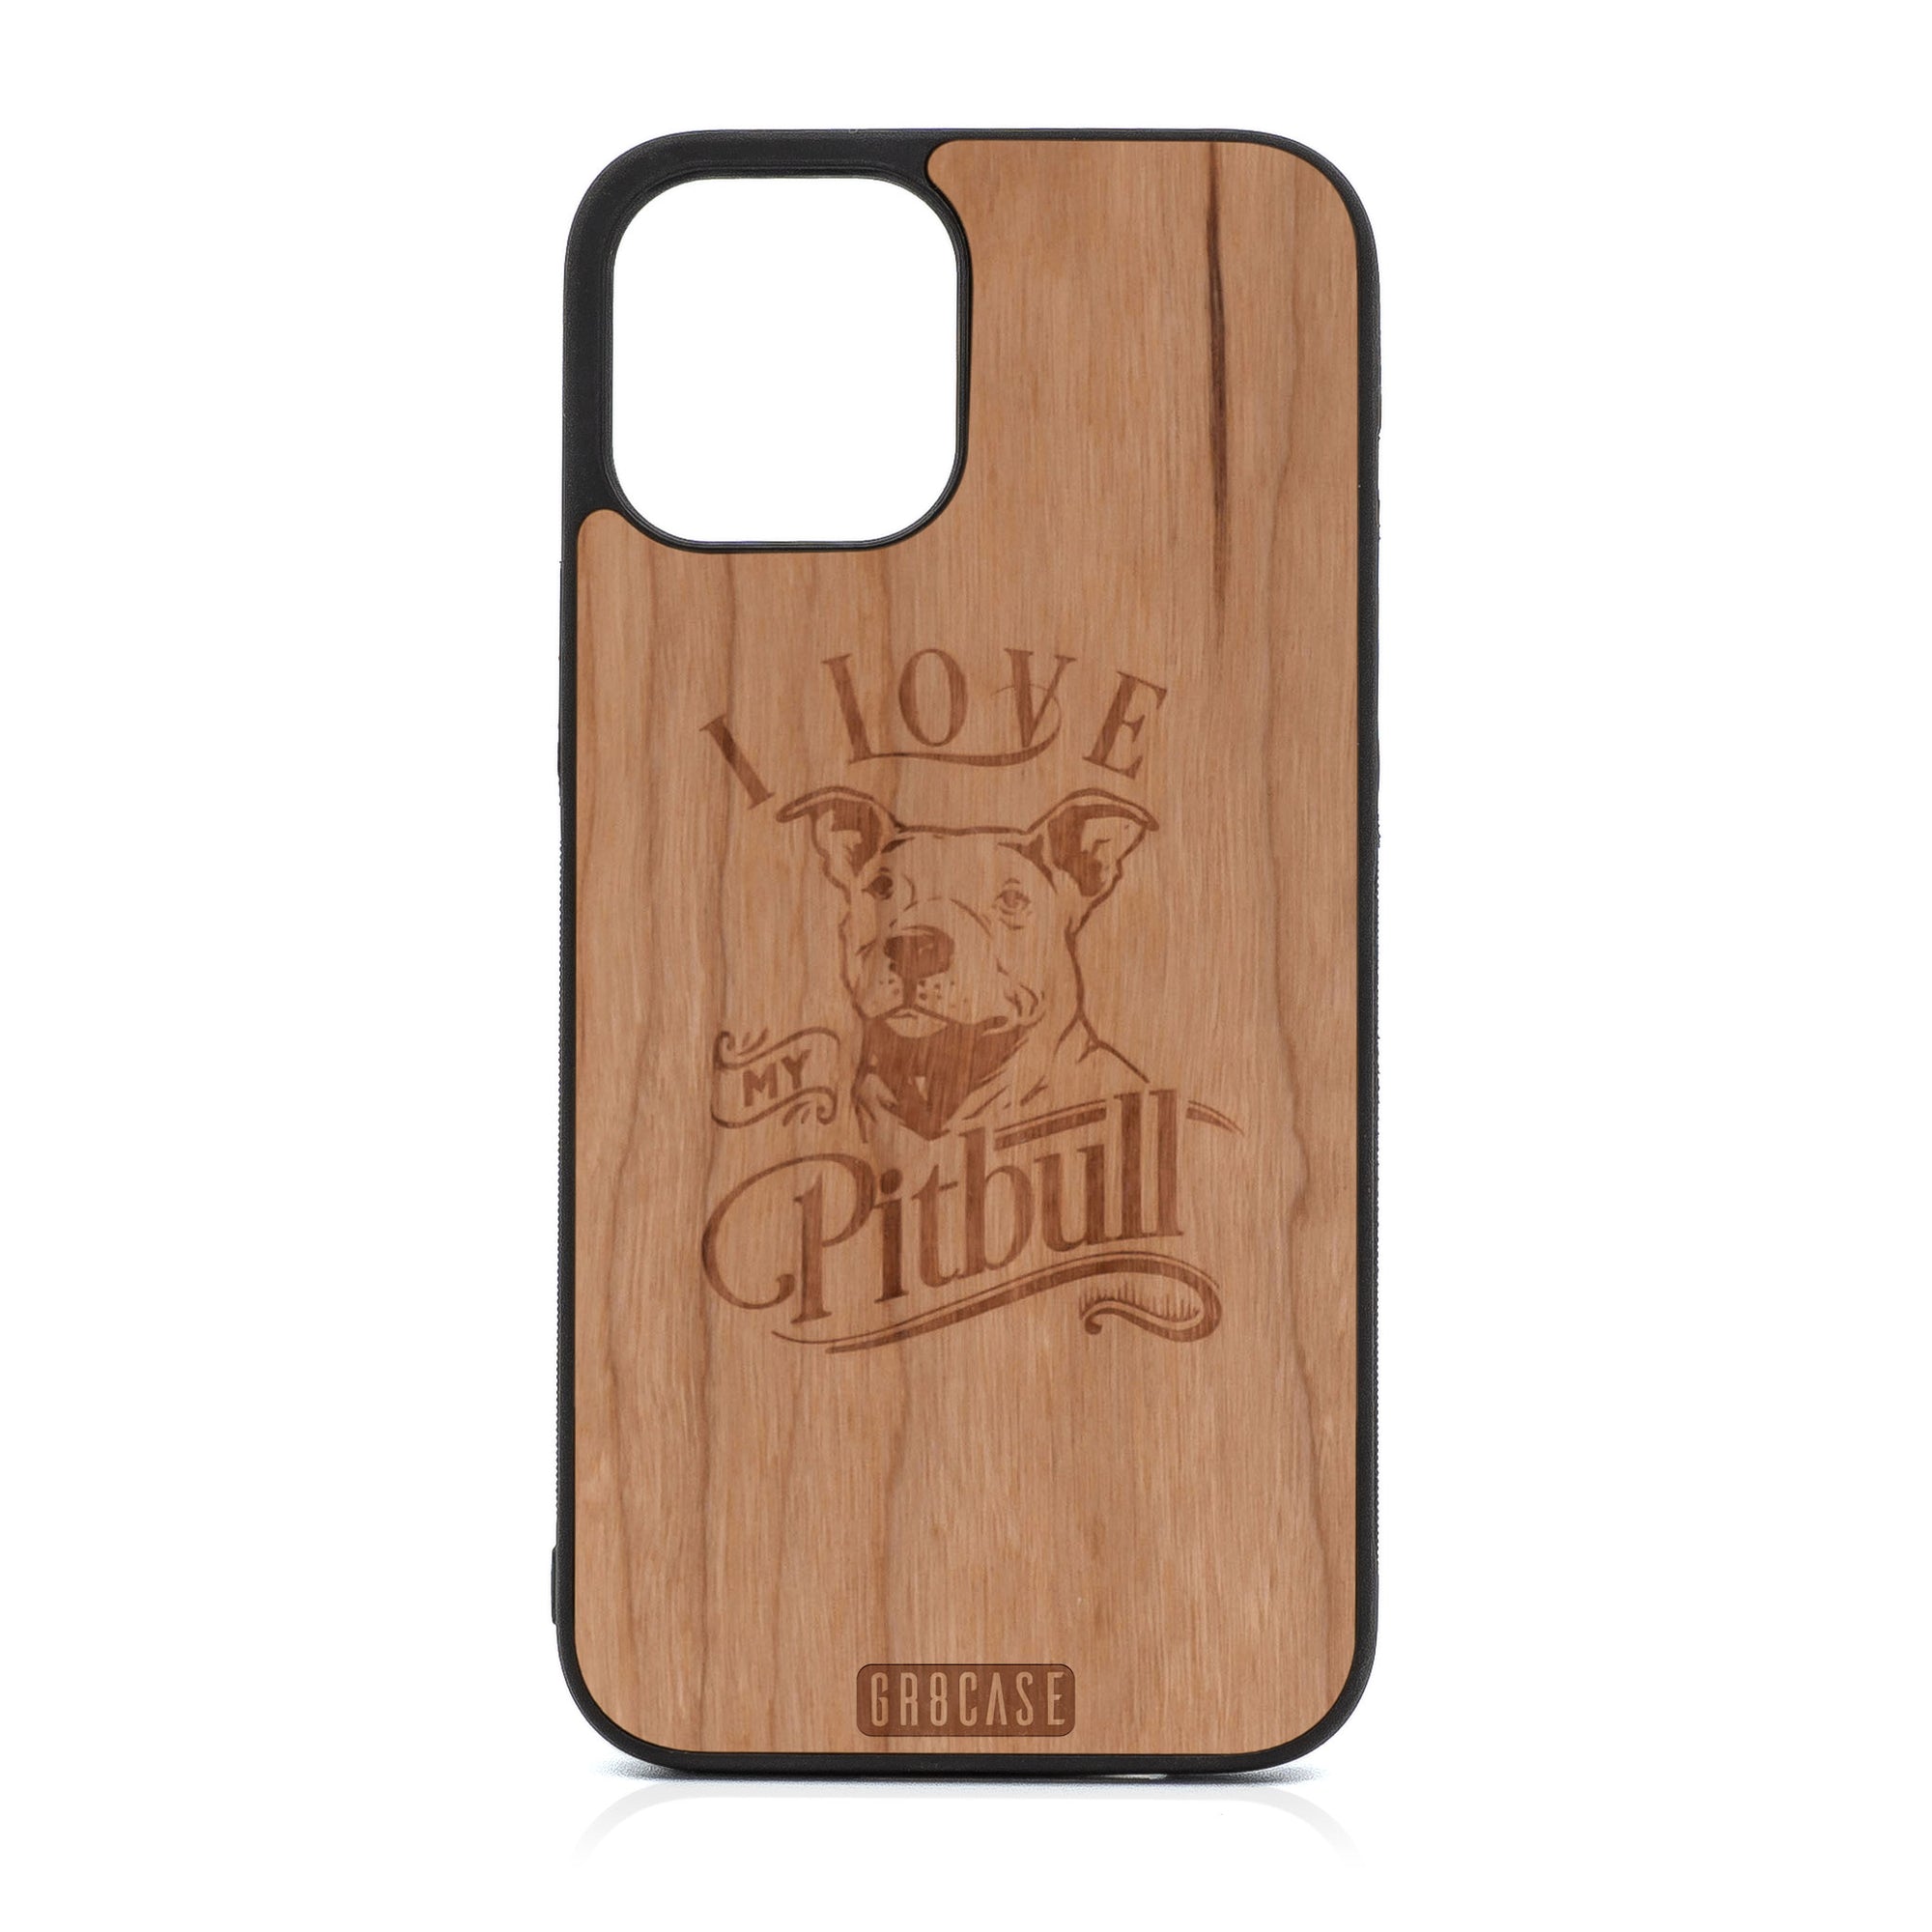 I Love My Pitbull Design Wood Case For iPhone 12 Pro Max